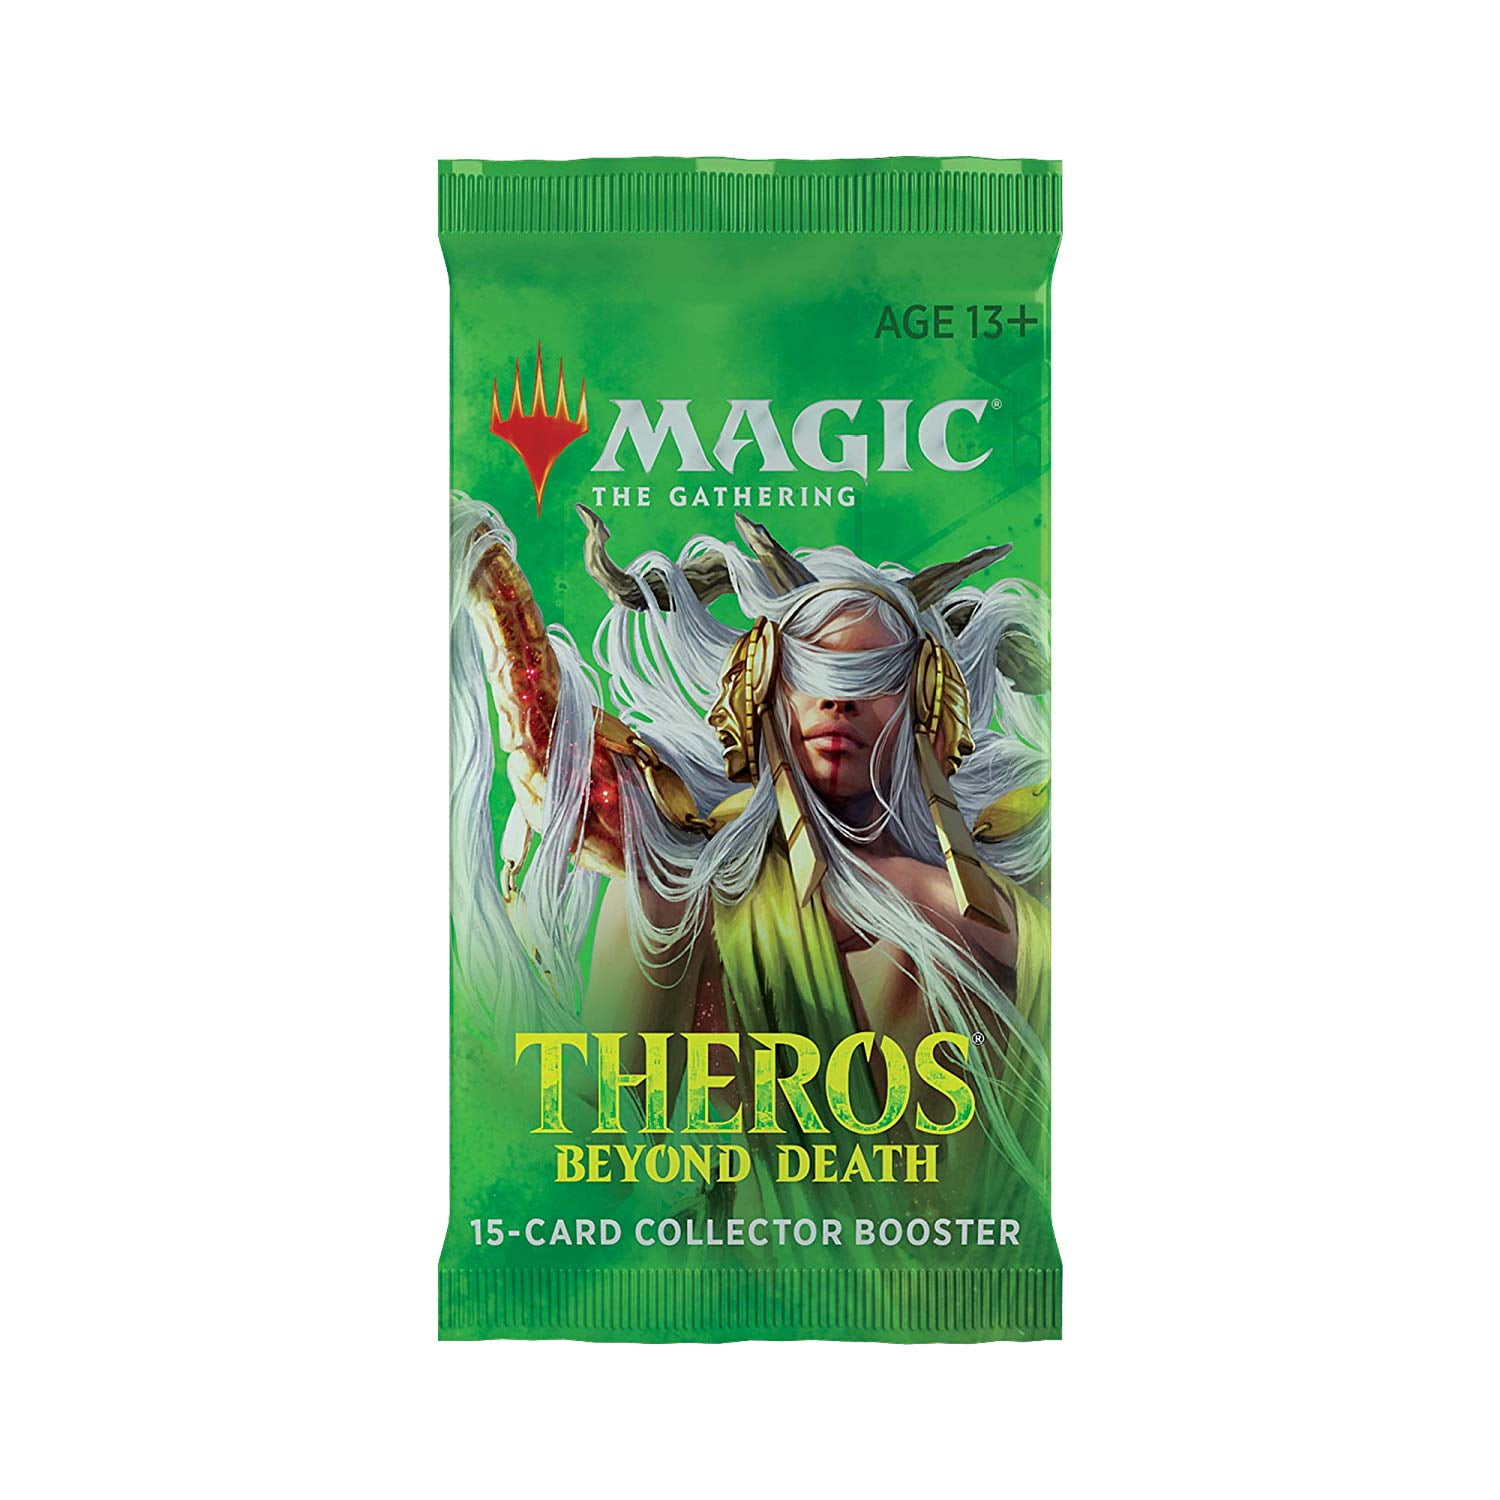 Magic The Gathering Throne of Eldraine Special Collector Booster Cards 16 Pieces for sale online 